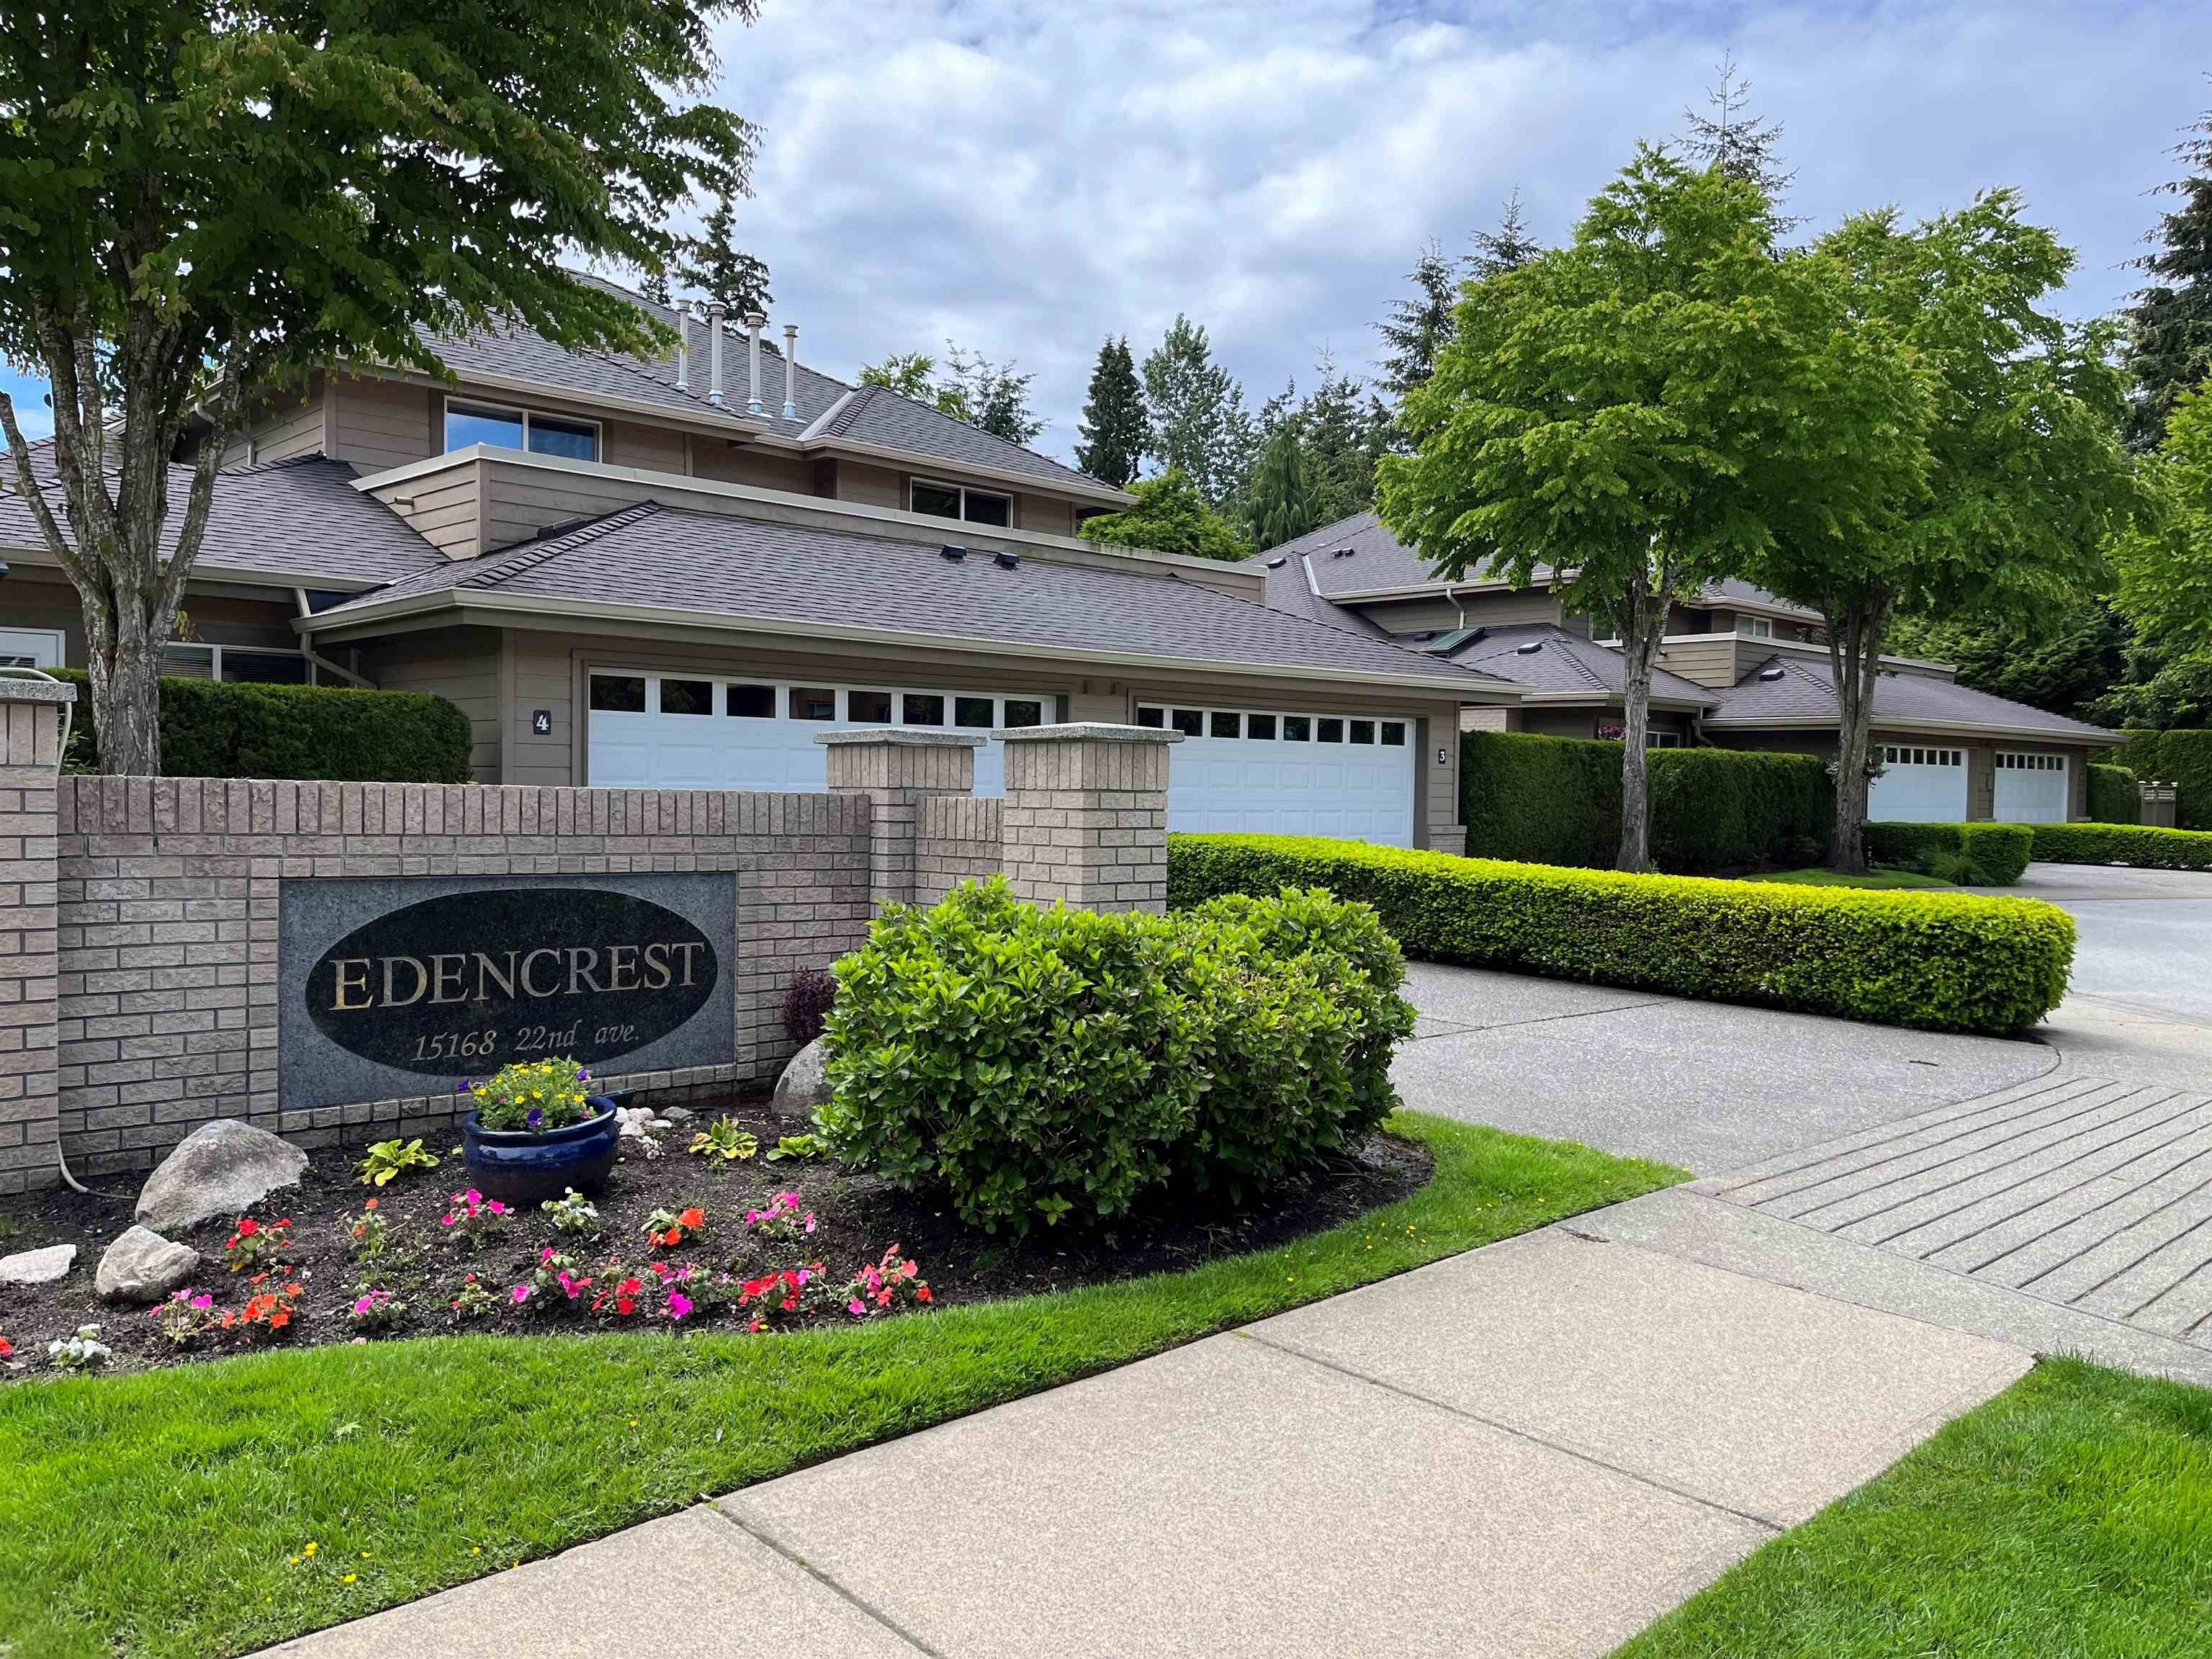 I have sold a property at 3 15168 22 AVE in Surrey
